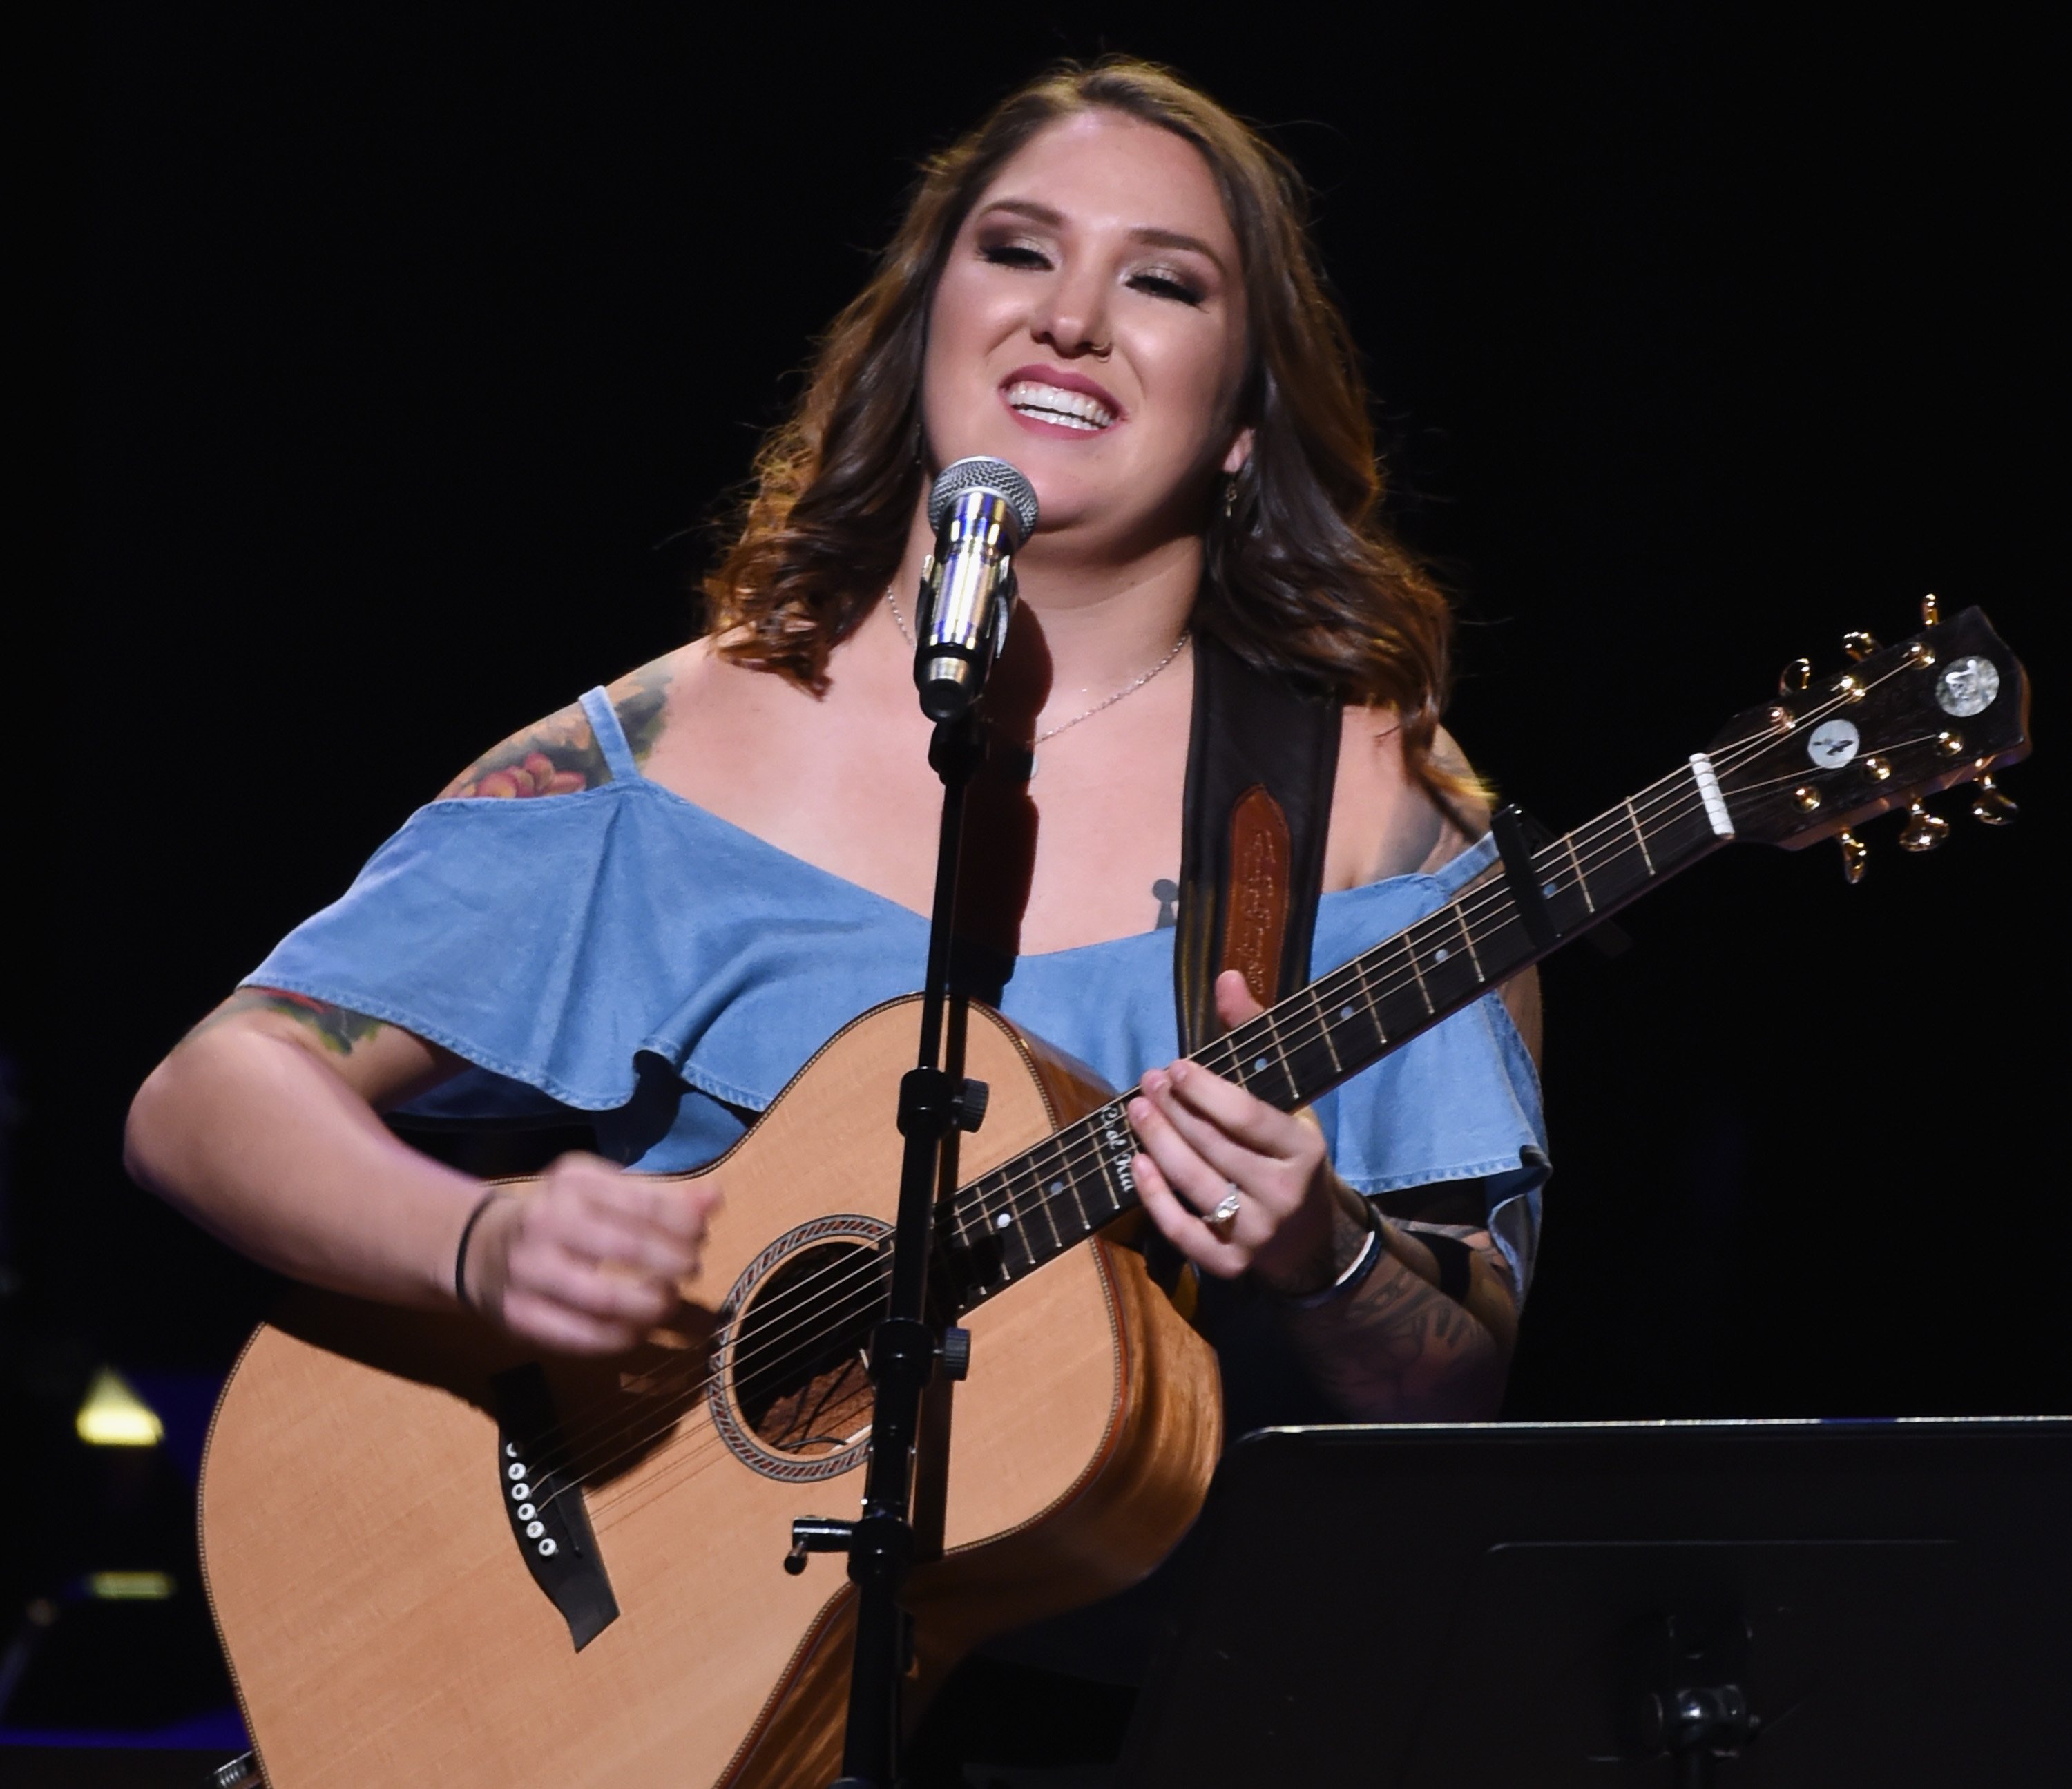 Singer/Songwriter Allie Colleen Brooks, Daughter of Garth Brooks makes her Grand Ole Opry debut during Dr. Ralph Stanley Forever: A Special Tribute Concert at Grand Ole Opry House on October 19, 2017 in Nashville, Tennessee. | Source: Getty Images